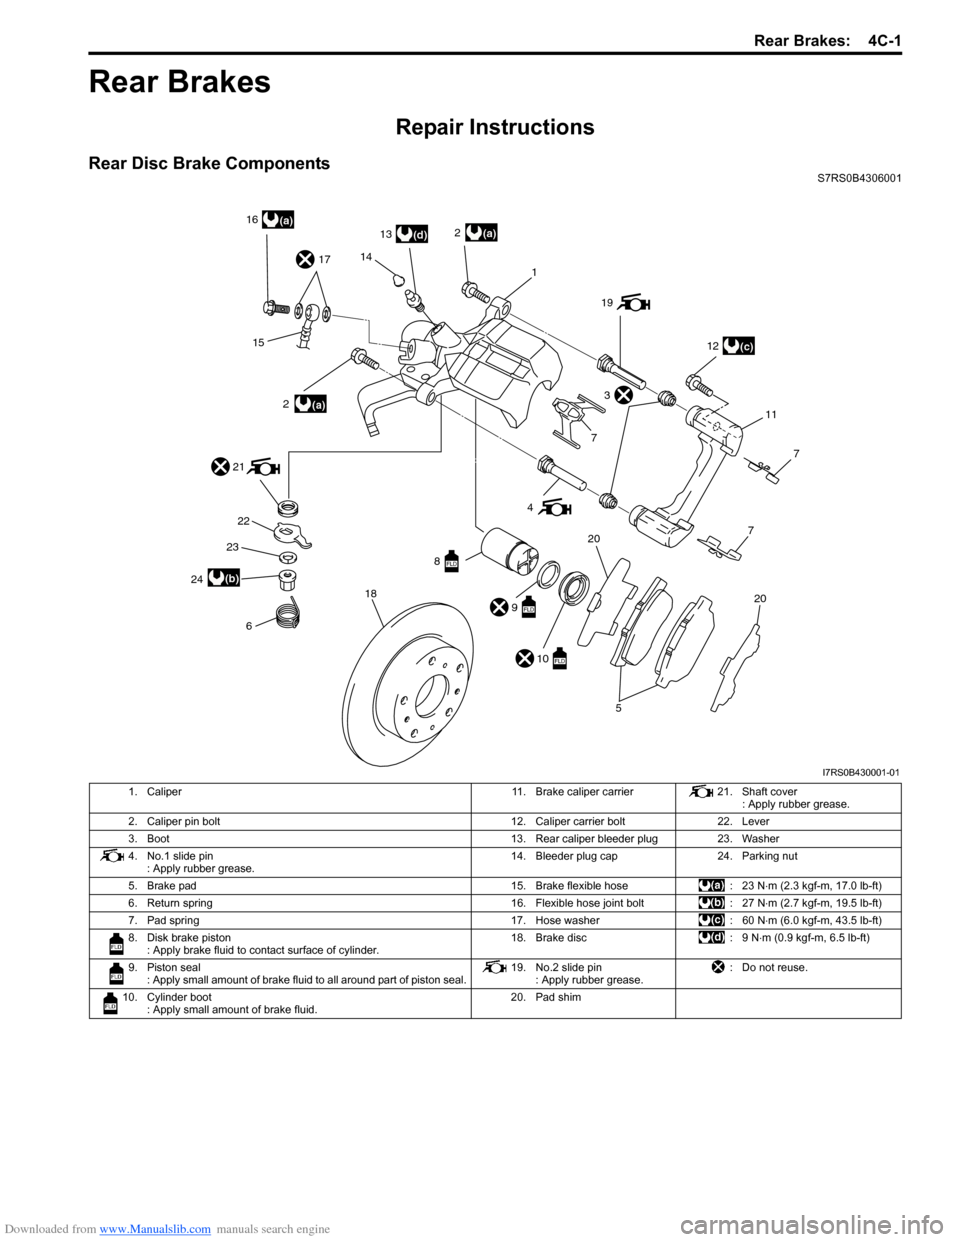 SUZUKI SWIFT 2005 2.G Service Workshop Manual Downloaded from www.Manualslib.com manuals search engine Rear Brakes:  4C-1
Brakes
Rear Brakes
Repair Instructions
Rear Disc Brake ComponentsS7RS0B4306001
(d)
(c)
(a)
(a)
(a)16171413
2
1
15 2 19
12
11